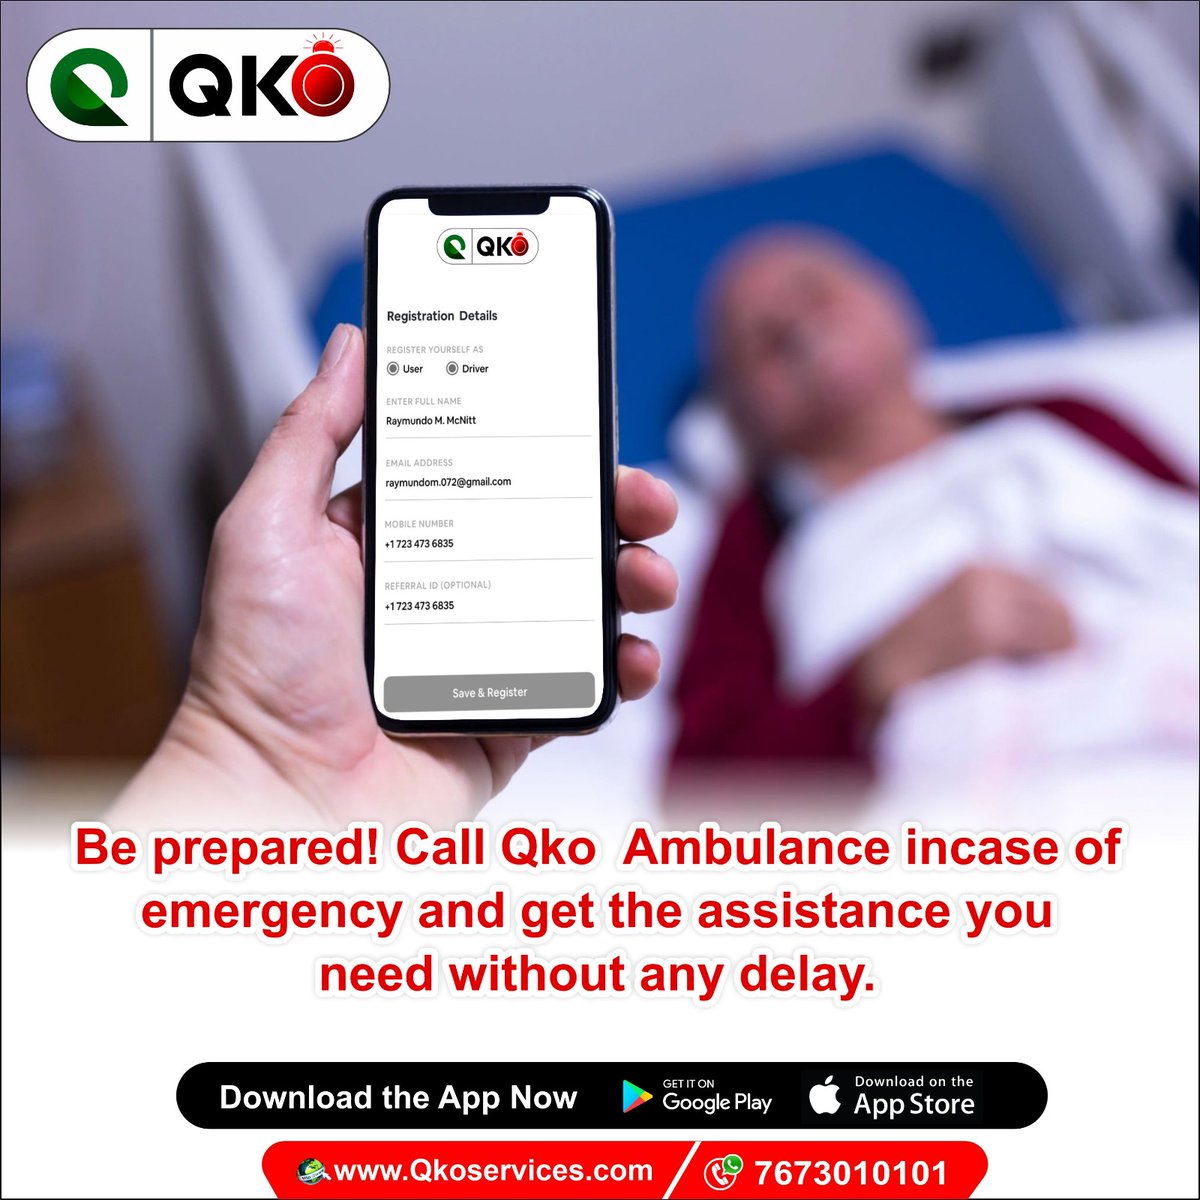 In your medical emergency call Qko ambulance get instant response 24X7 🚑
#ambulance #andratuttobene #andrews #bookings #booking #healthyfitfood #healthydietfood #healthbeauty #landscapephotos #landscapeshot #landscapeslovers #ambulanceindonesia